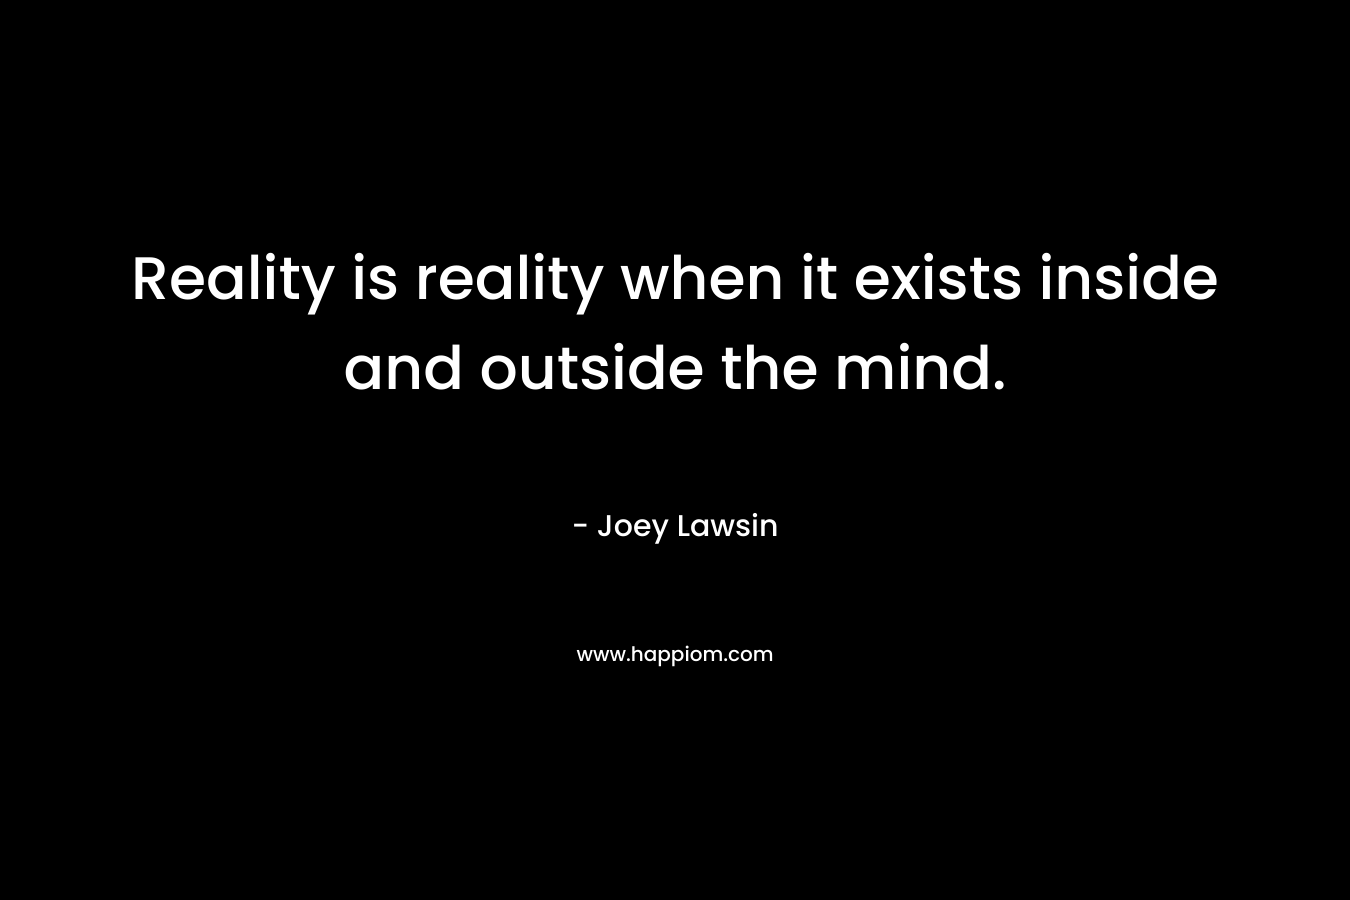 Reality is reality when it exists inside and outside the mind.